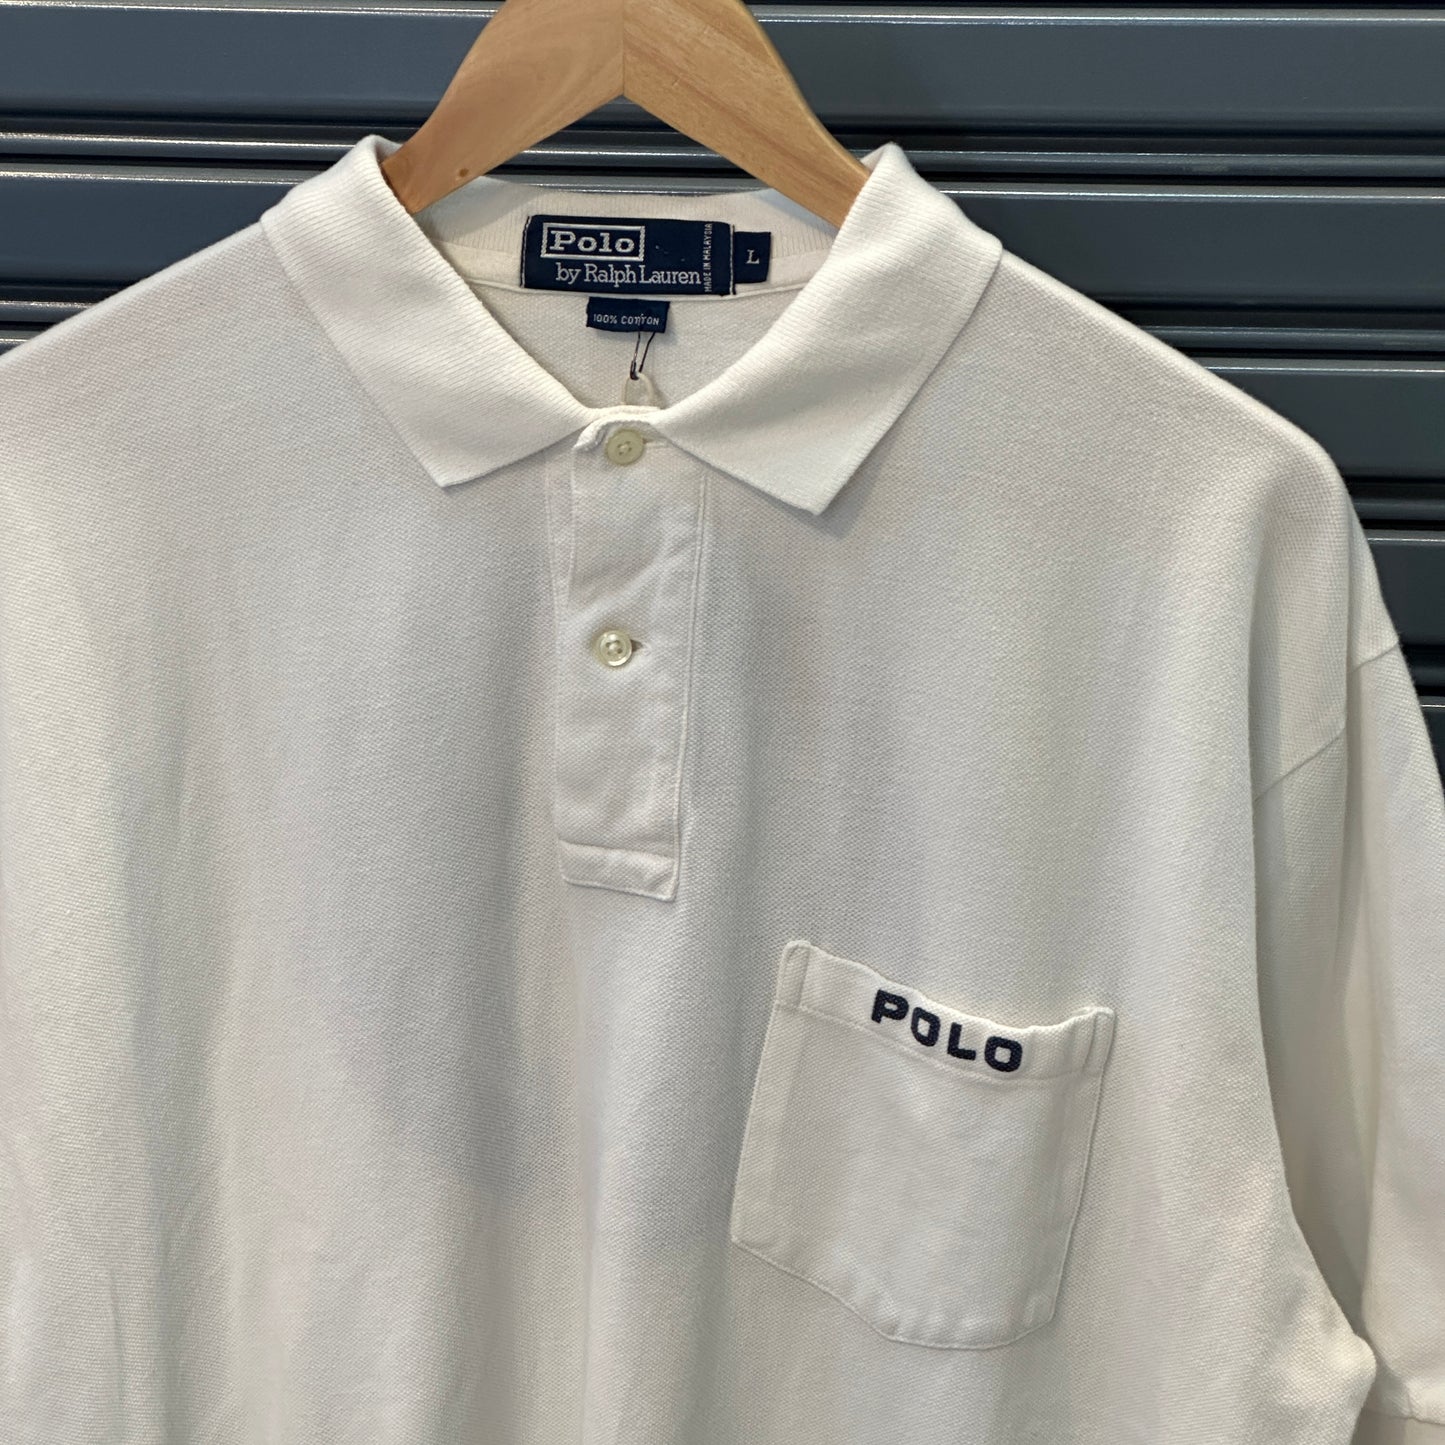 Vintage Polo by Ralph Lauren "P-97" 00's Pocket Polo Shirt